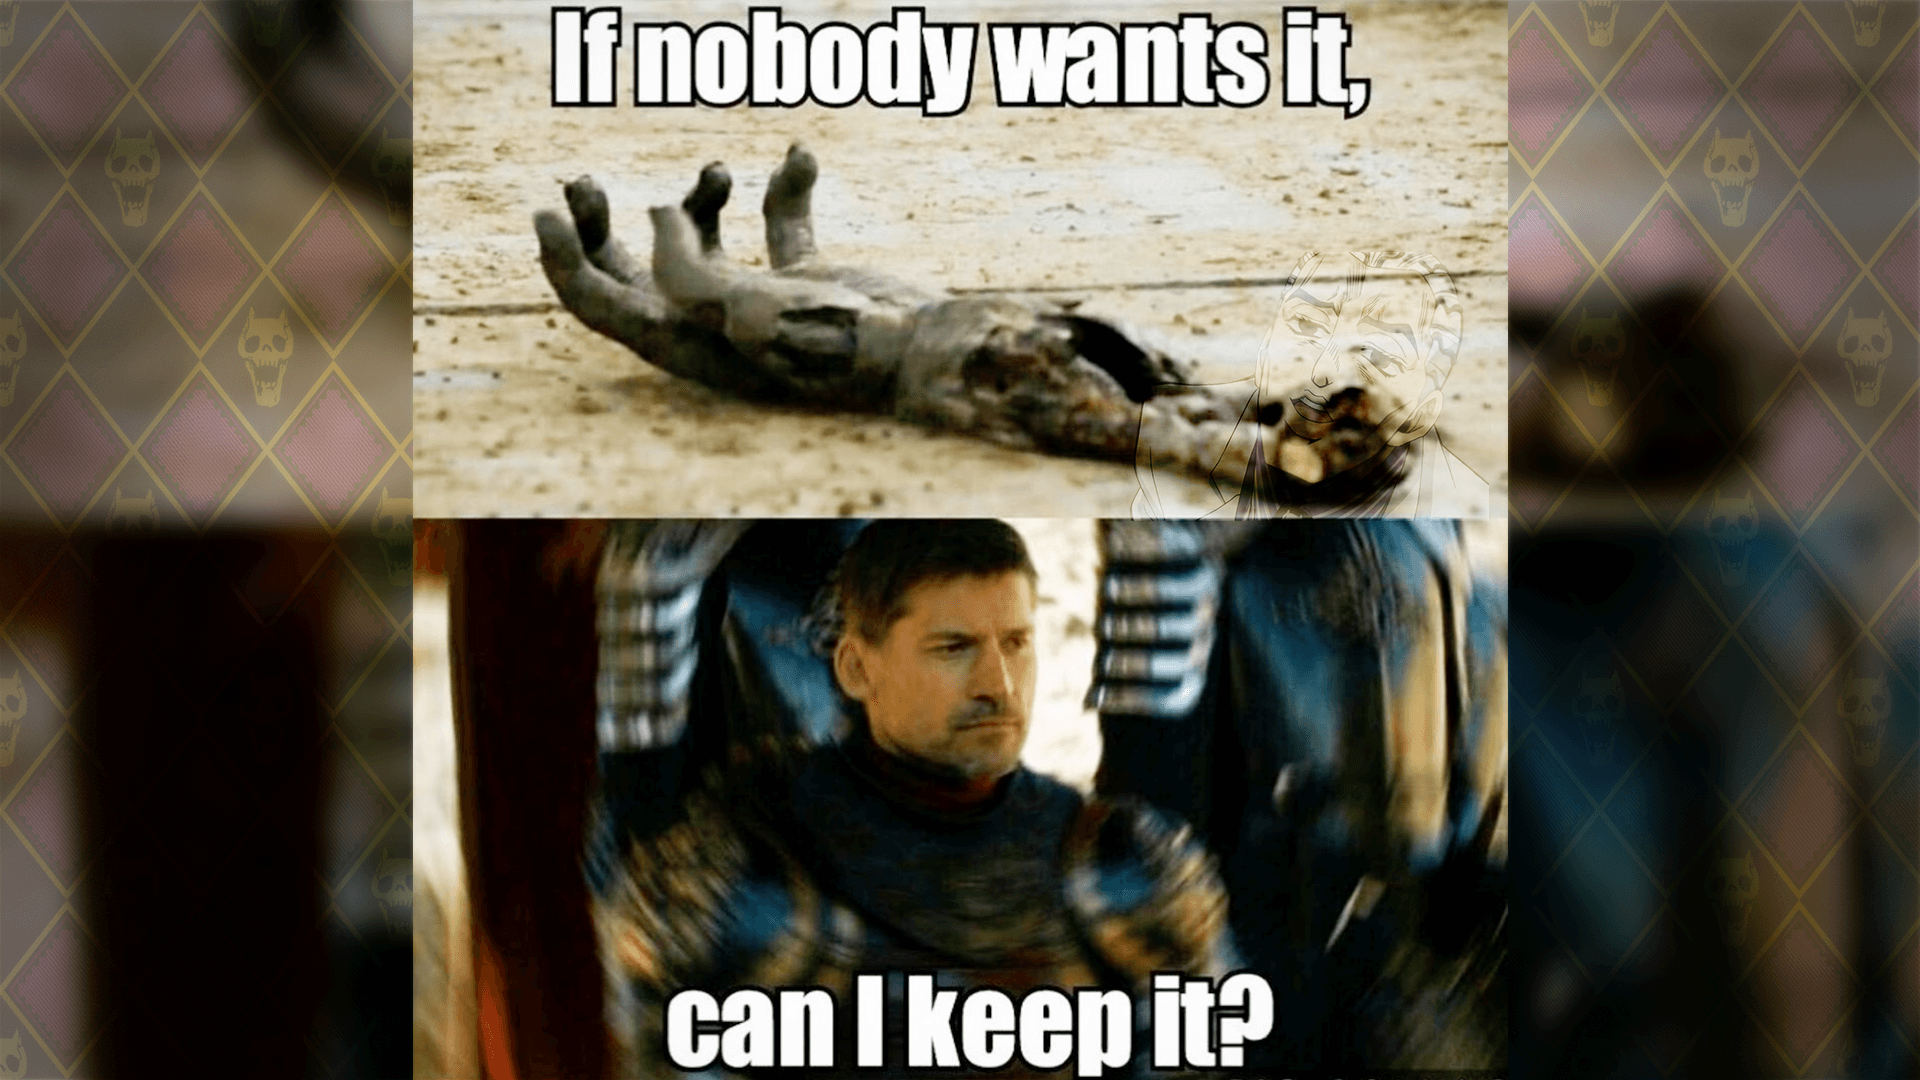 10 Game Of Throne Memes That Will Make you Laugh.